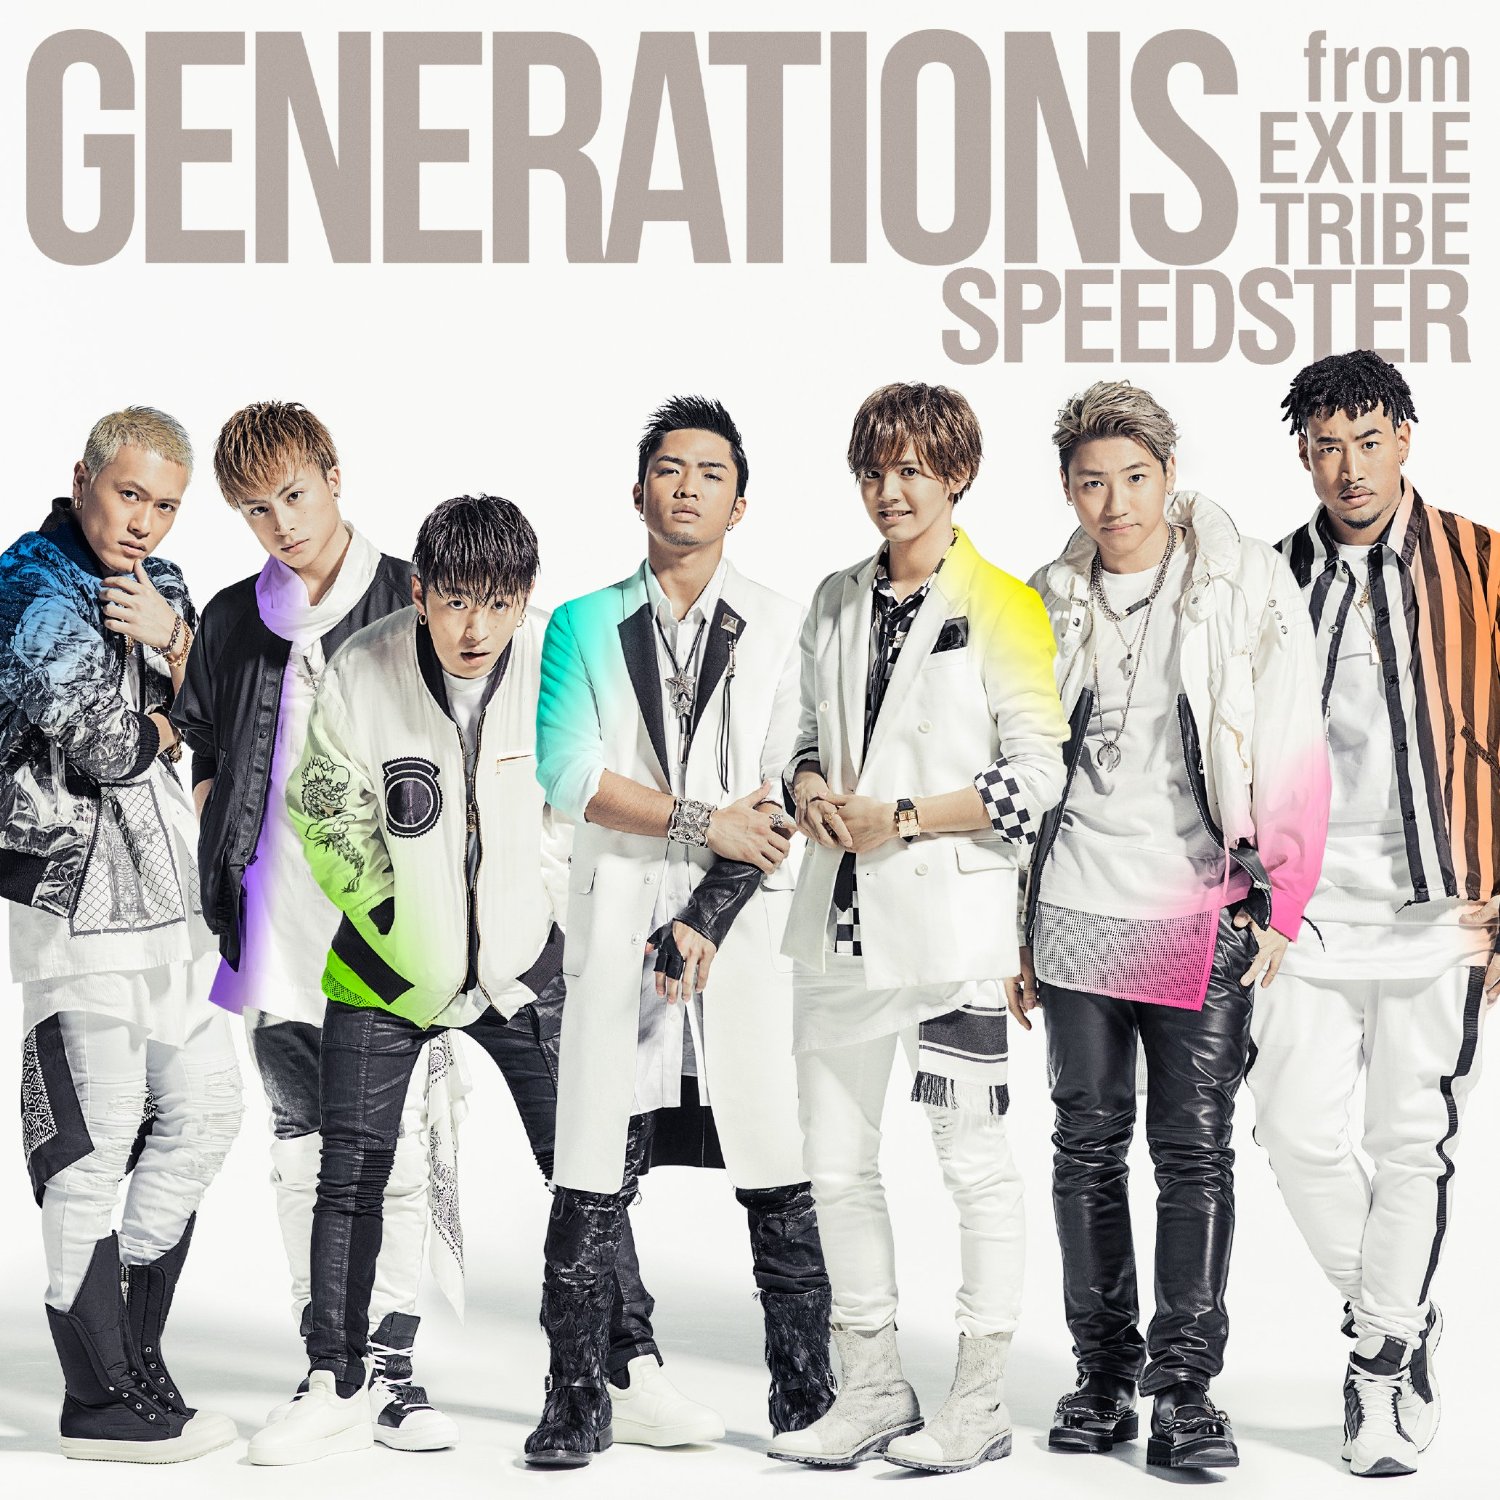 GENERATIONS from EXILE TRIBE GENERATION…